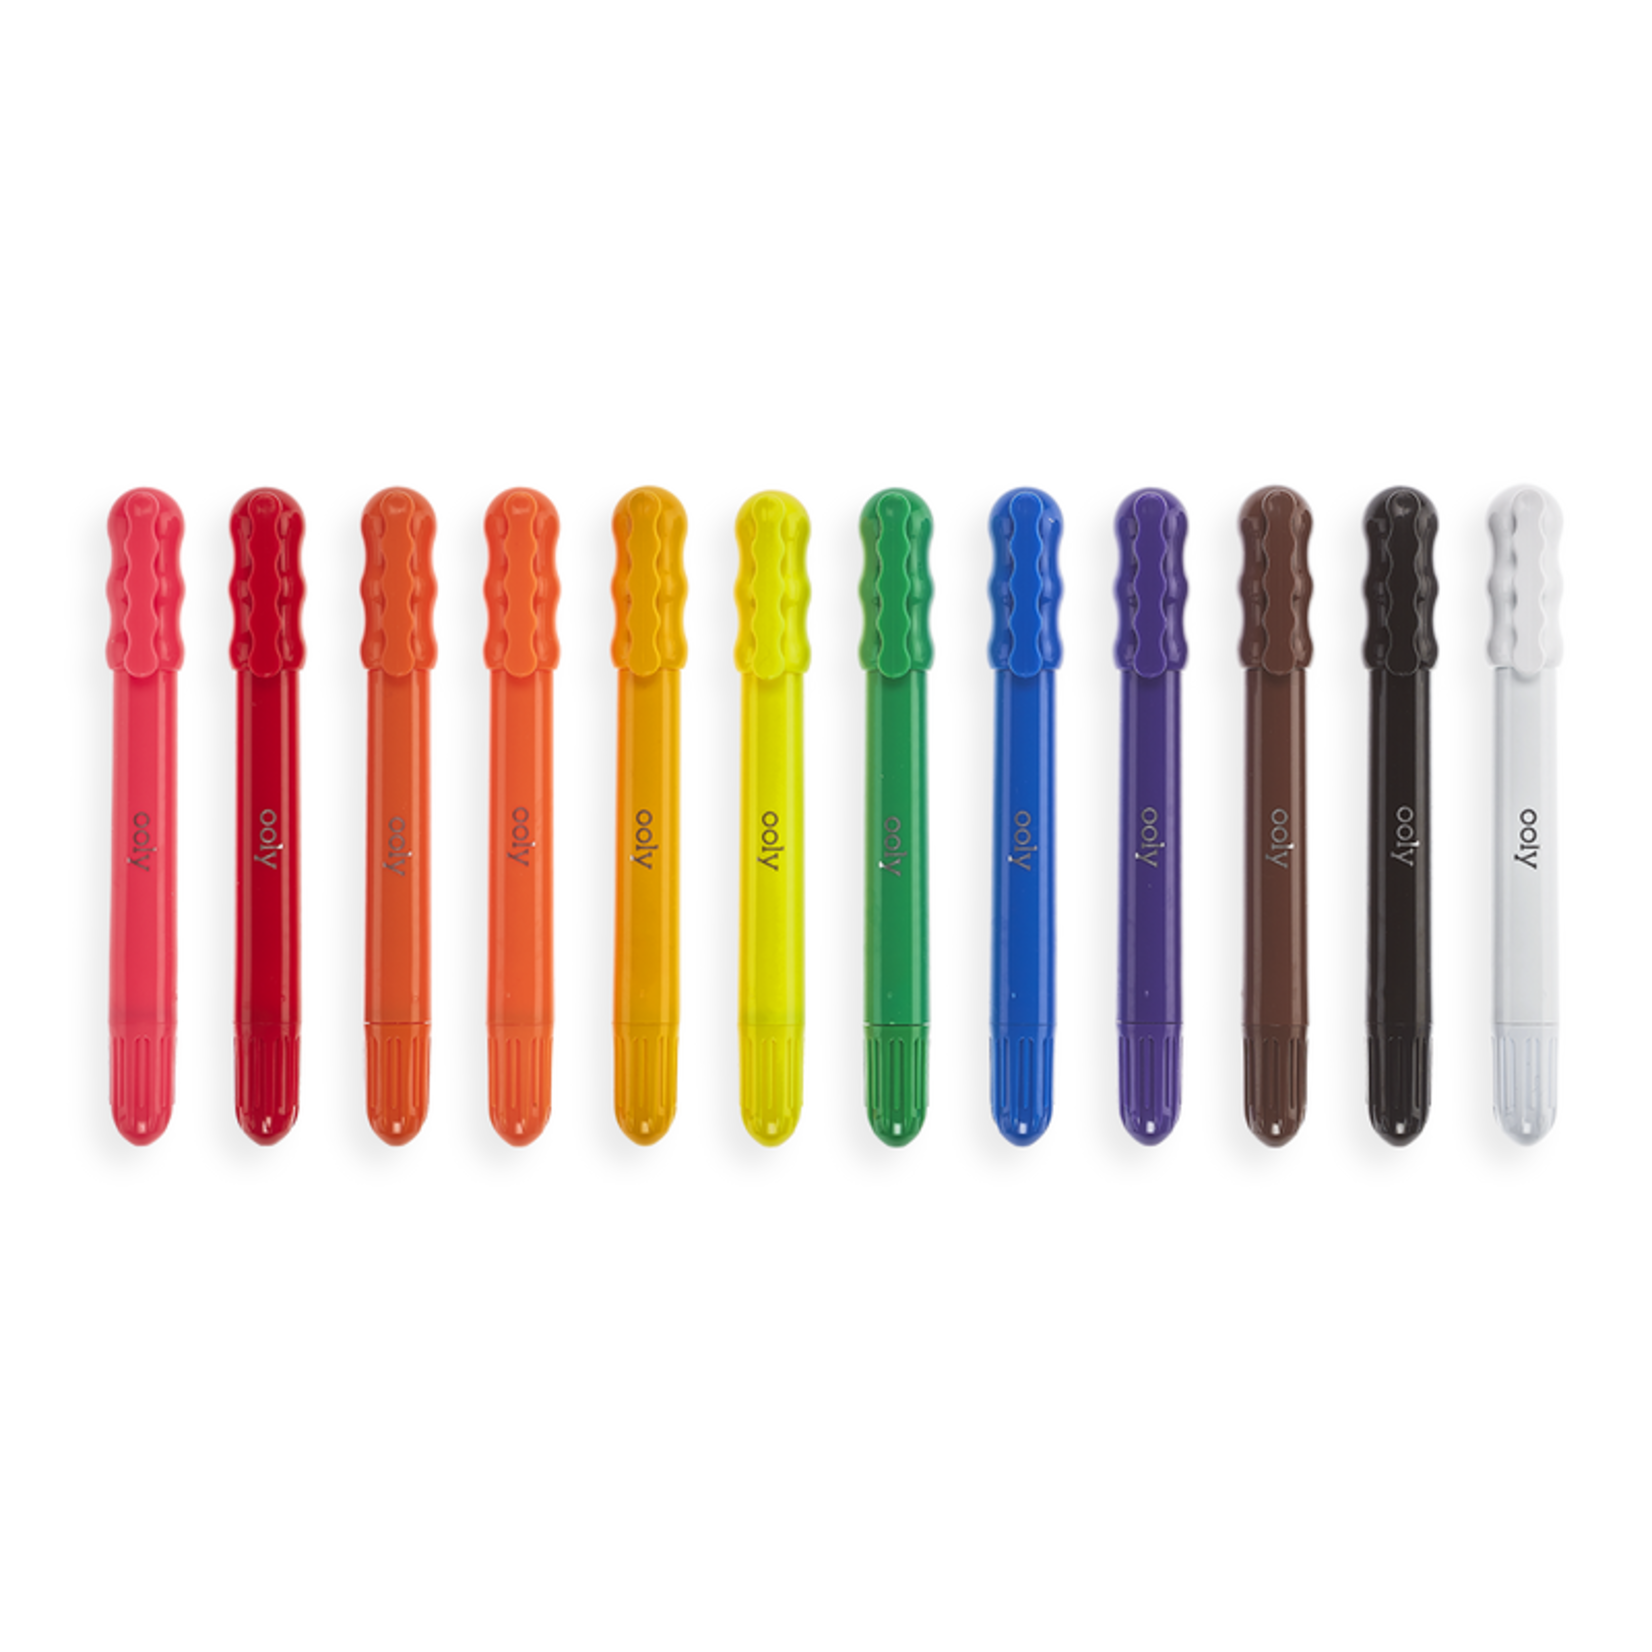 OOLY Rainy Day Gel Crayons - Set of 12